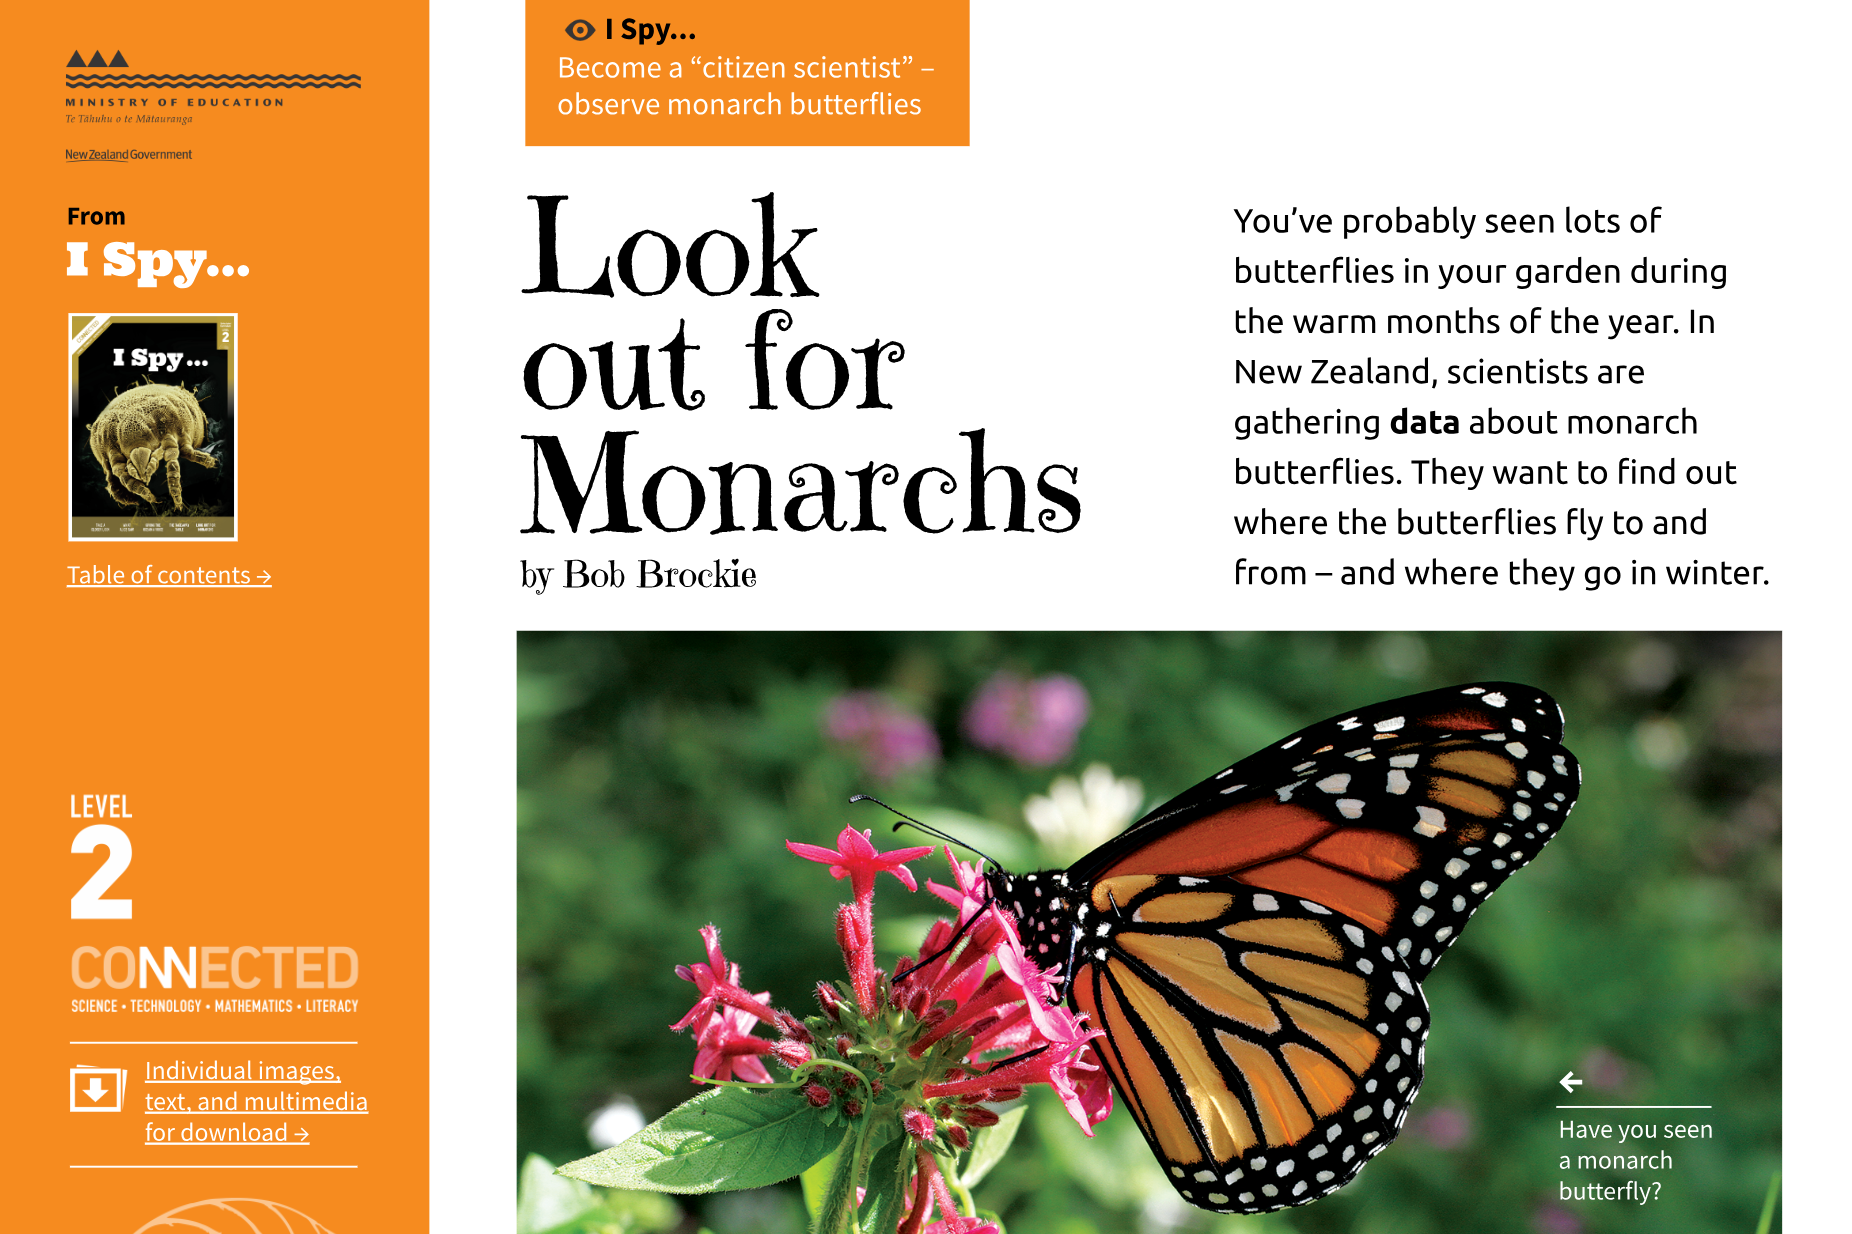 Image for look out for monarchs january 2013